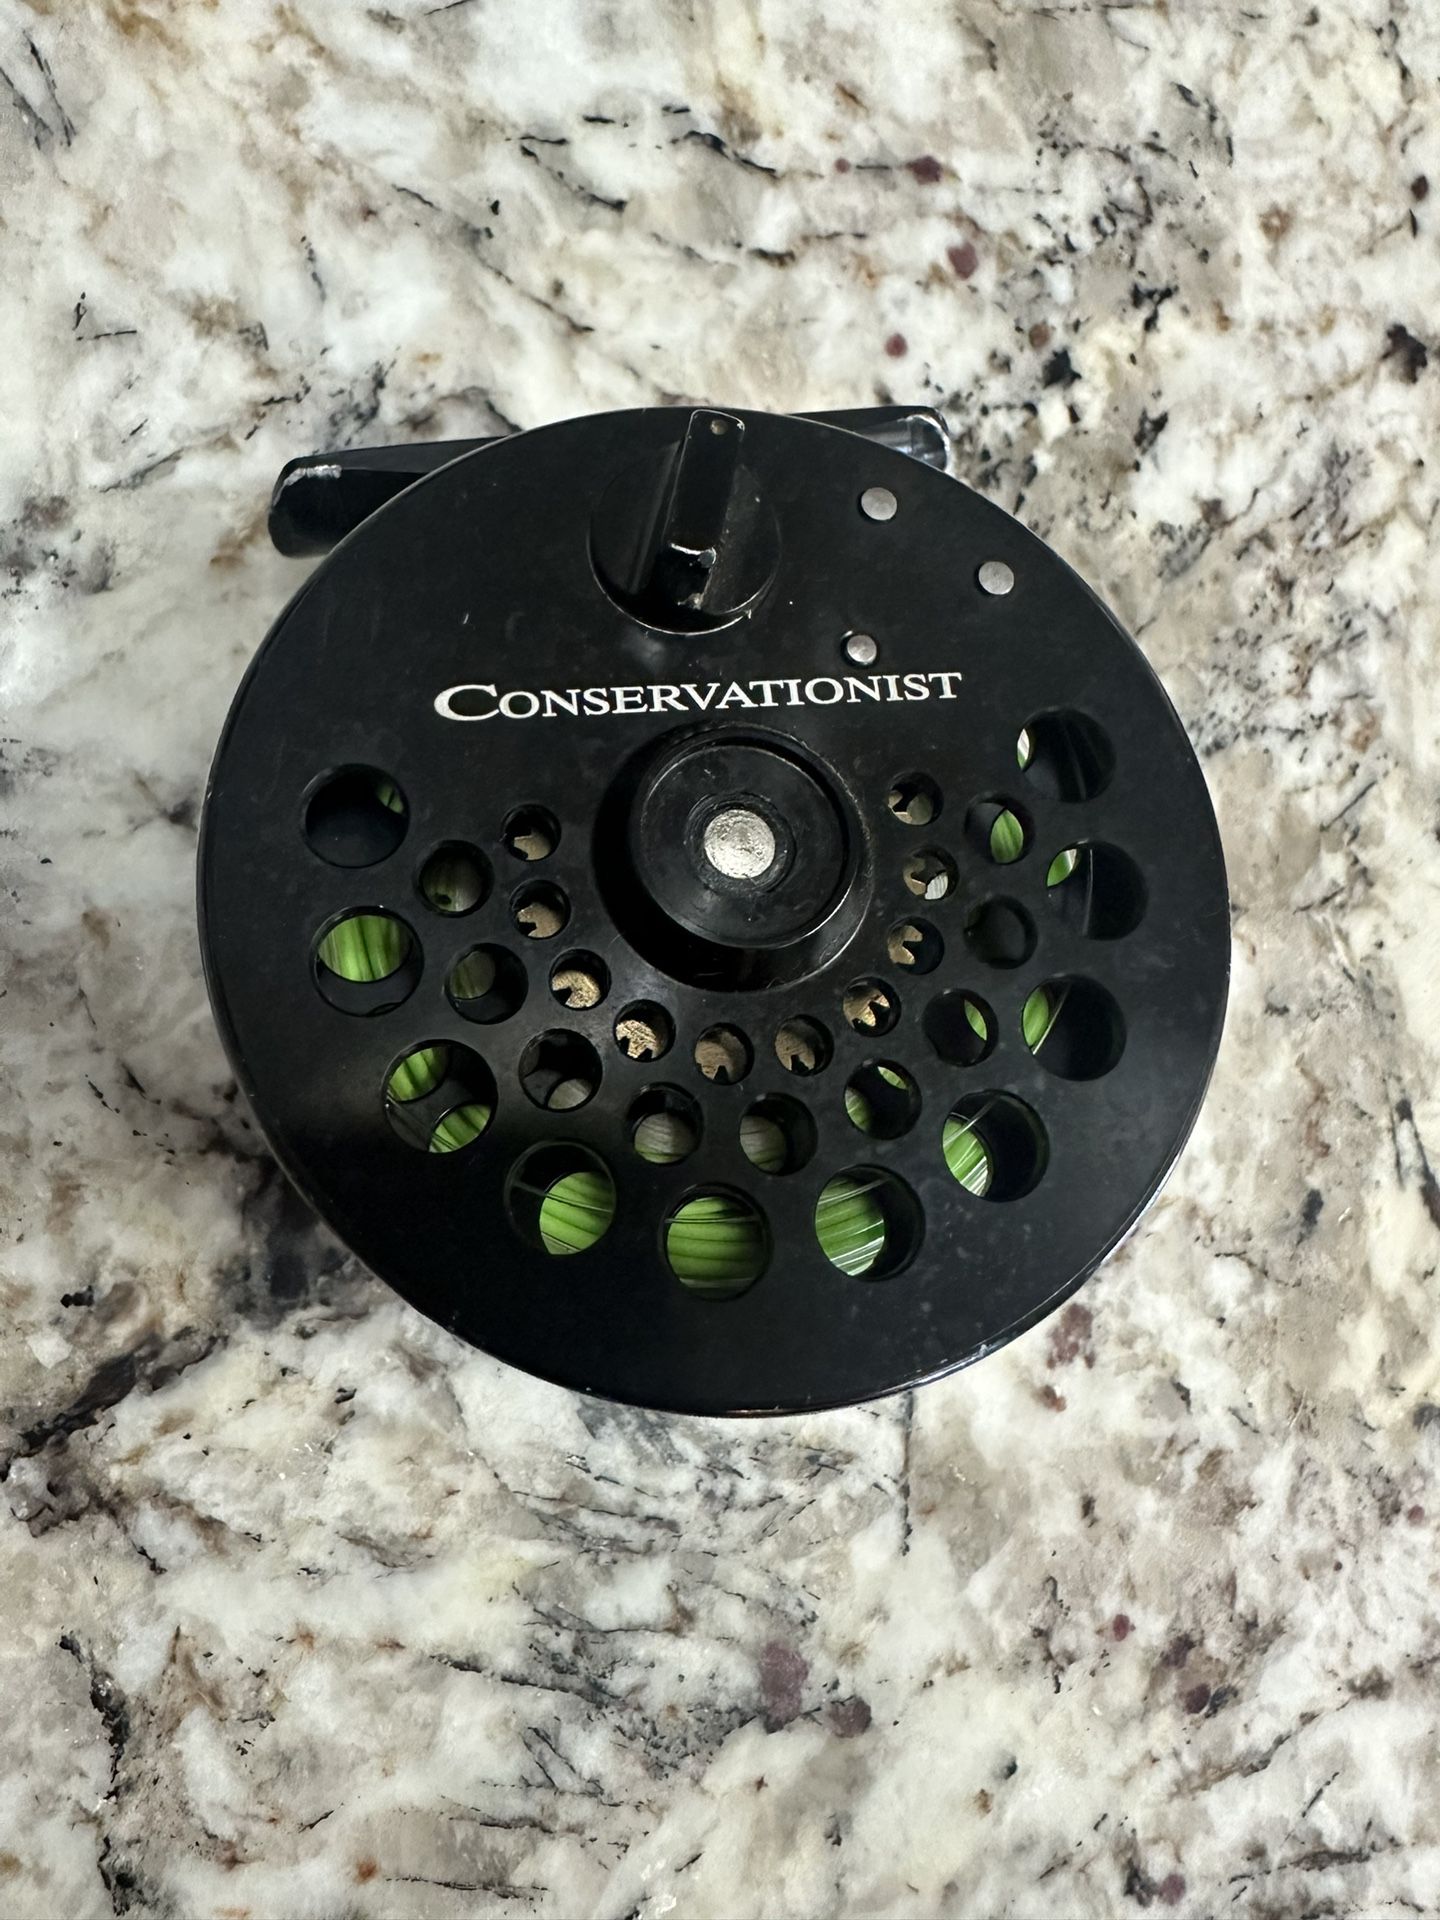 White River Conservationist Fly Fishing Reel. 5 wt